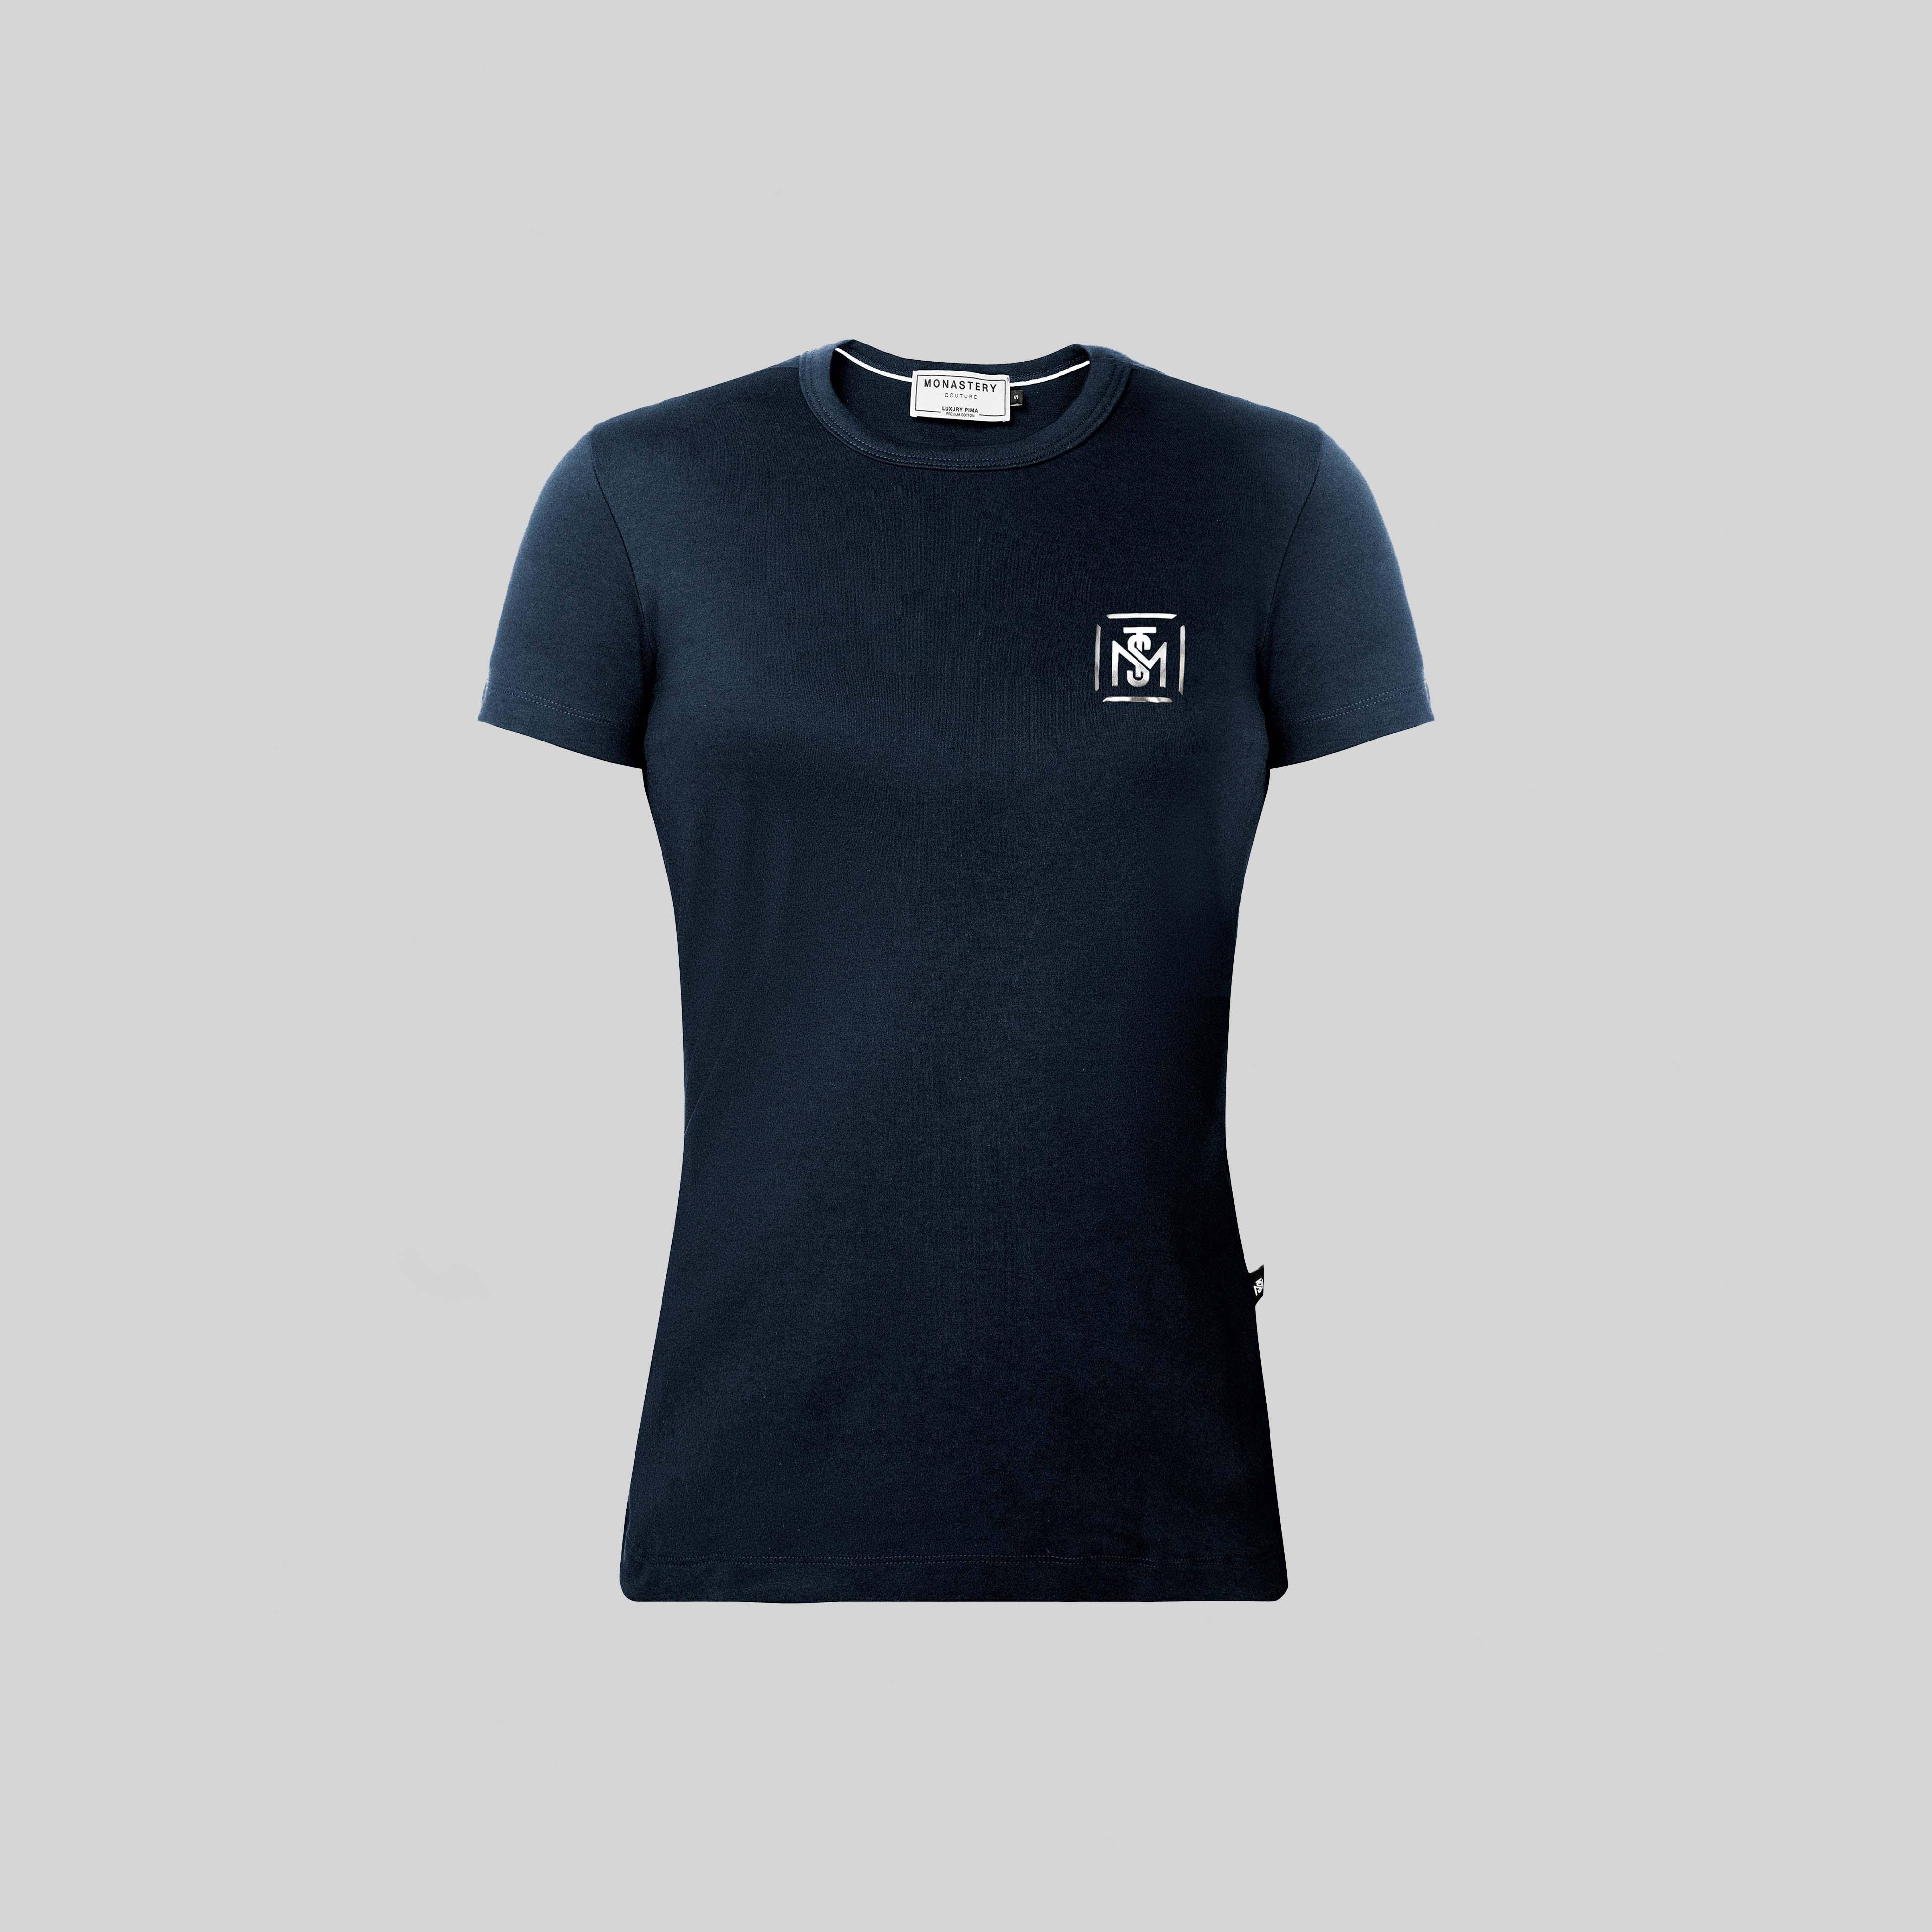 GINETTE T SHIRT NAVY BLUE | Monastery Couture